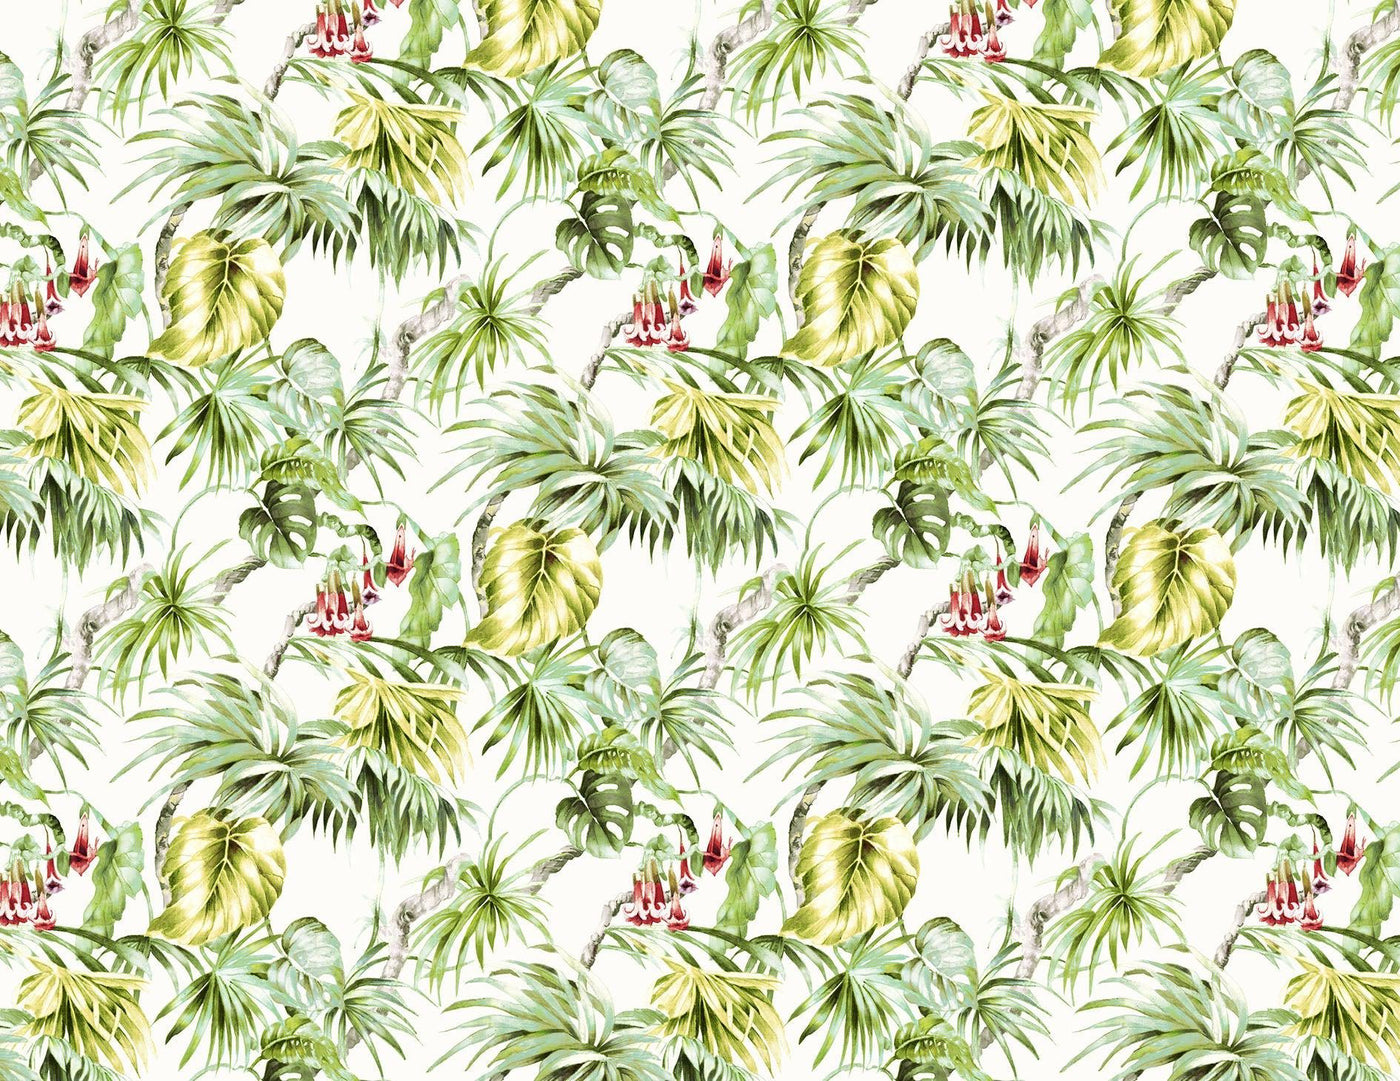 Lilly of the Valley Mural Wallpaper